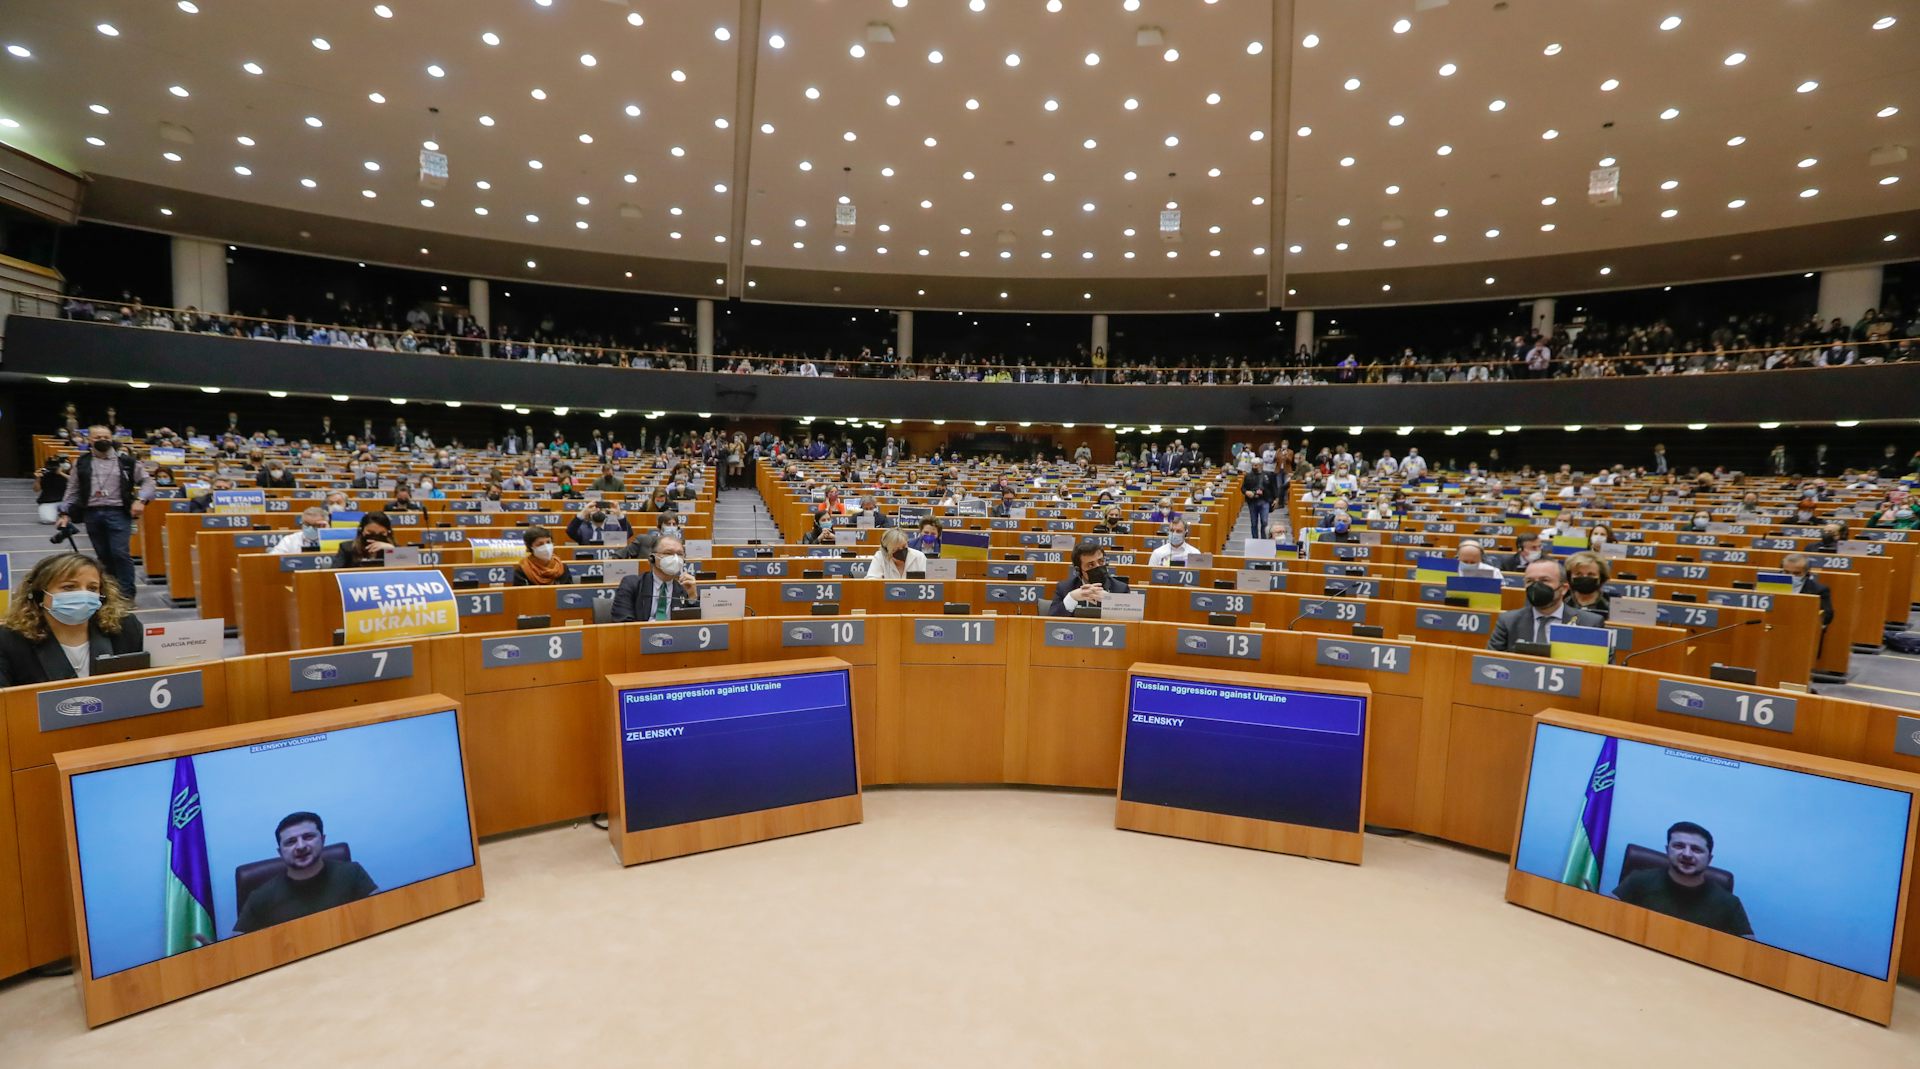 Ukranian president Volodymyr Zelensky appears on video screens in the chamber of the European Parliament while MEPs listen to his speech.